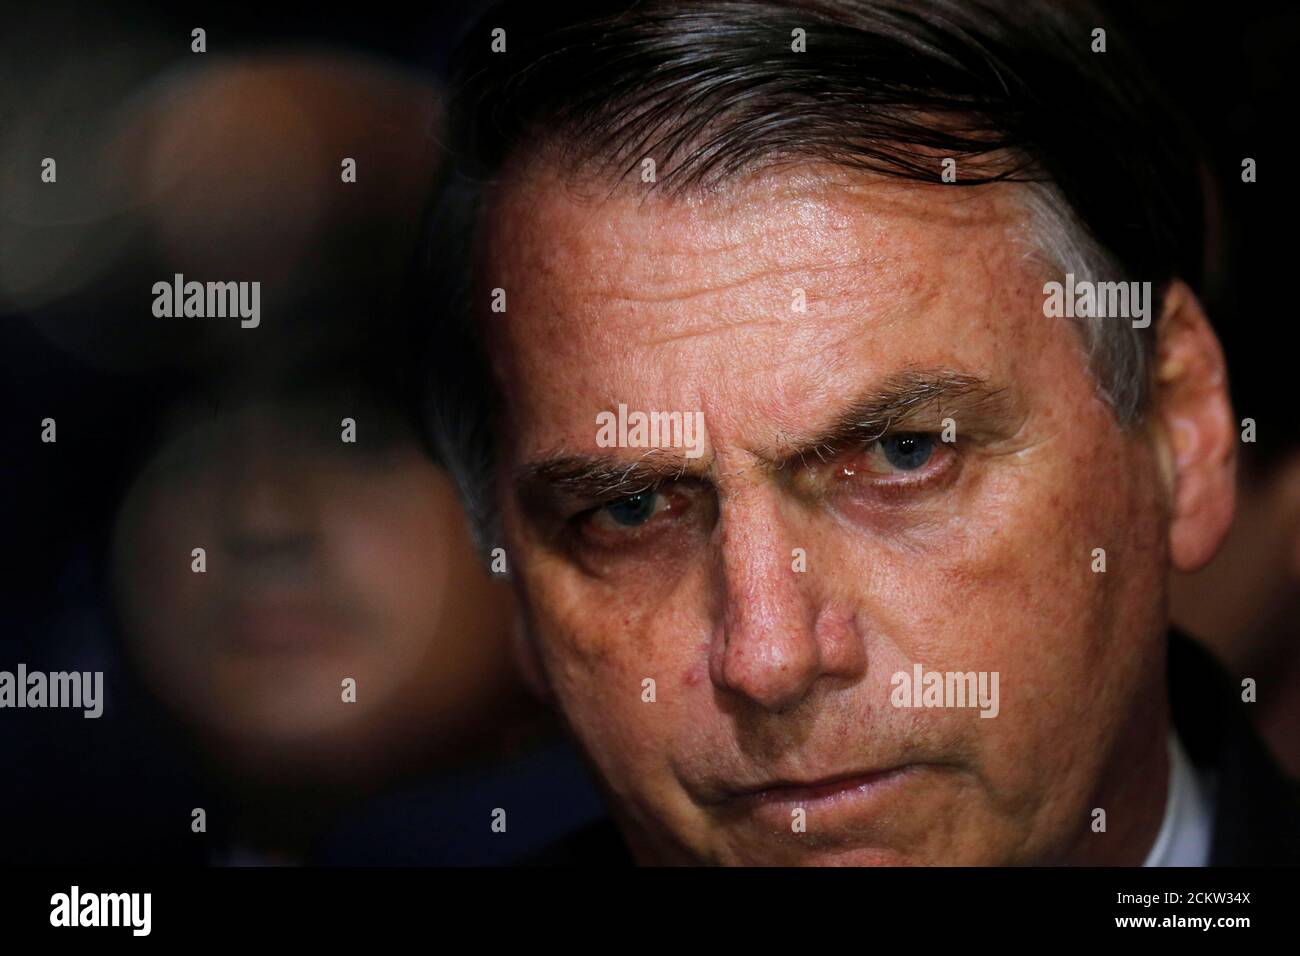 Brazil's President Jair Bolsonaro speaks during a ceremony for signature of the decree of the new regulation on the use, sale and carrying of weapons and ammunition, at Planalto Palace in Brasilia, Brazil May 7, 2019. REUTERS/Adriano Machado Stock Photo